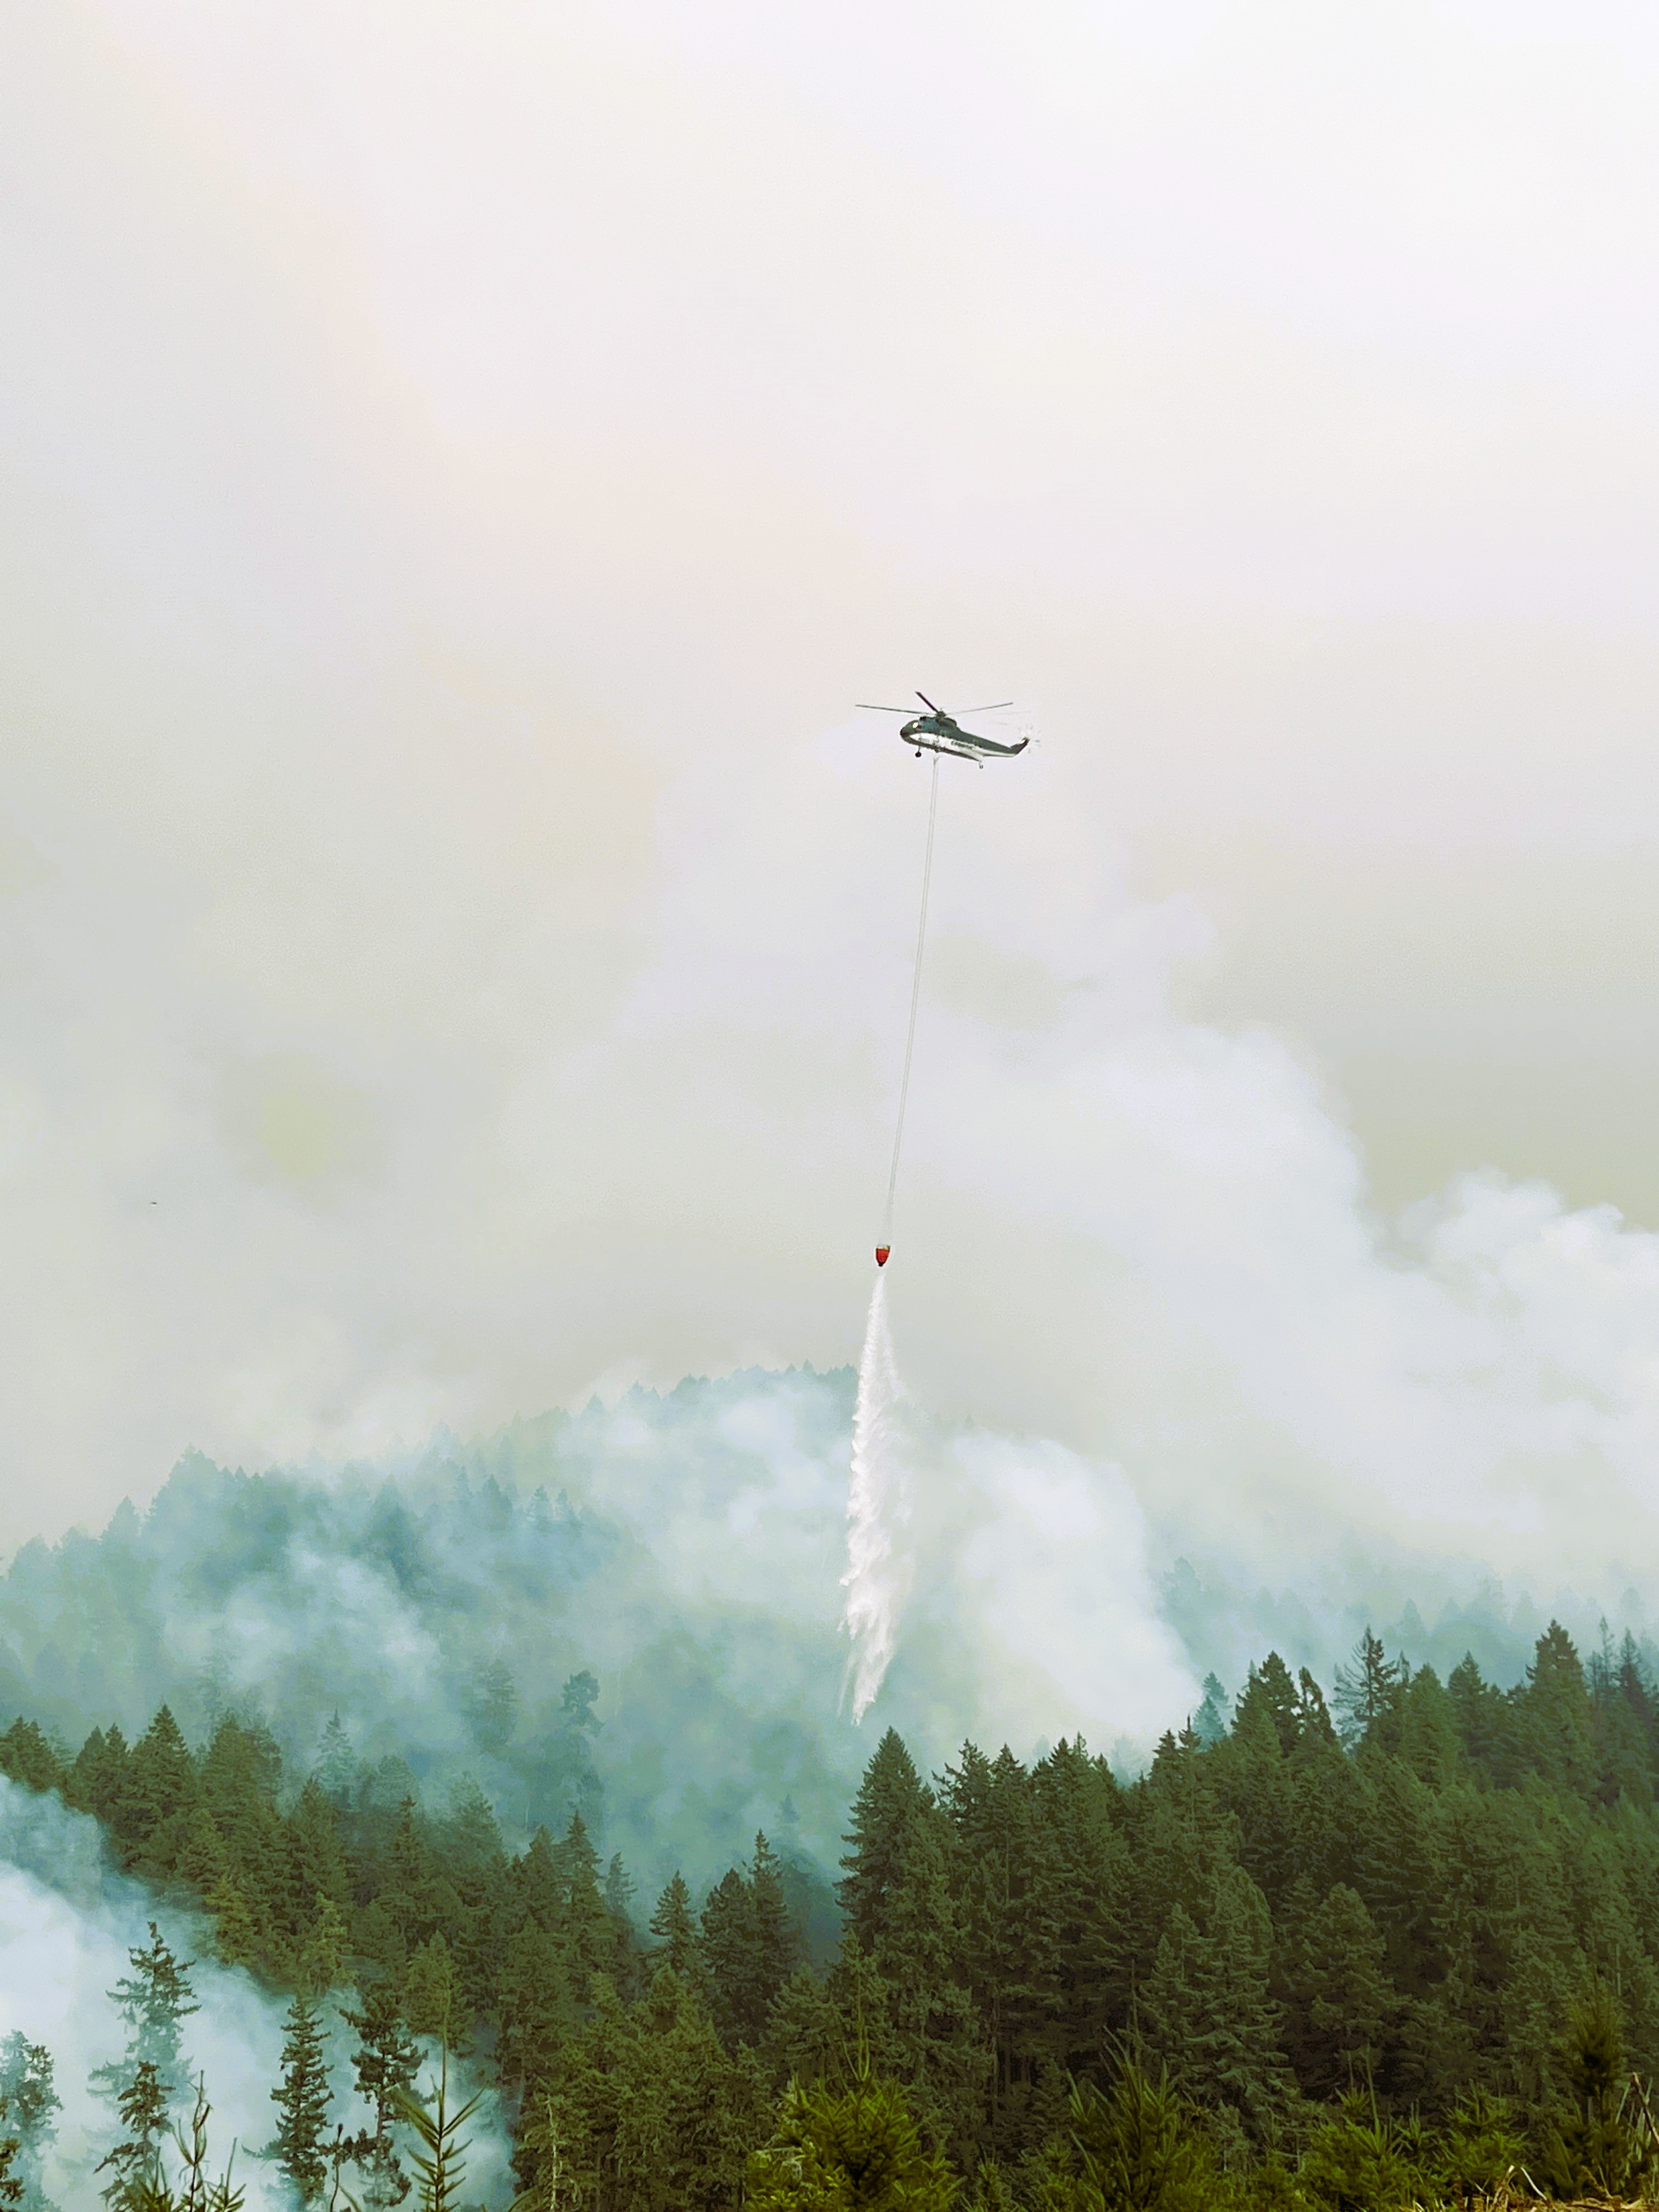 Image of helicopter dropping buckets of water on fire.